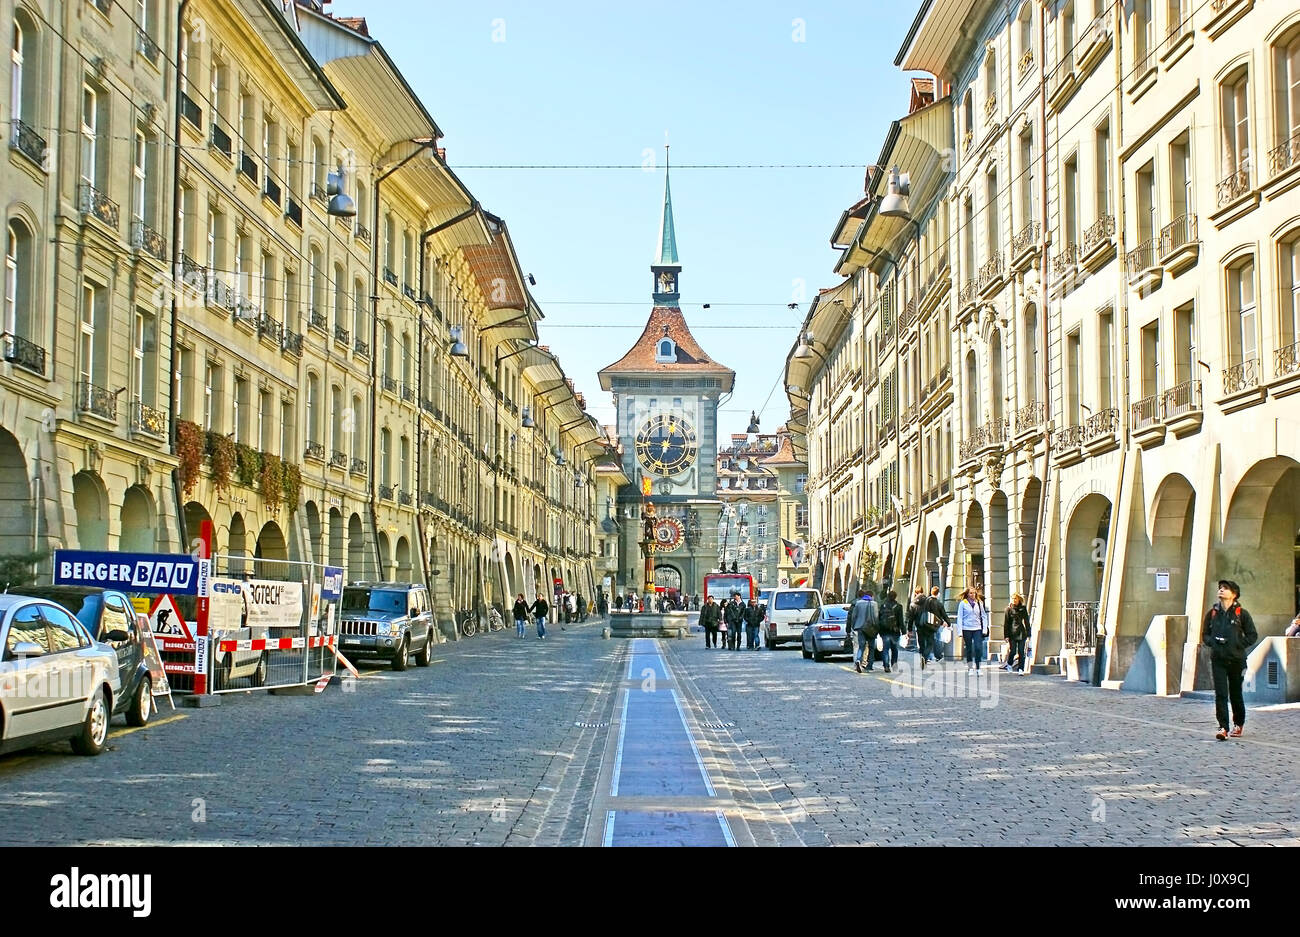 BERN, SWITZERLAND - MARCH 3, 2011: The walk along the medieval Kramgasse shopping street to the famous Zytglogge clock tower with preserved astronomic Stock Photo